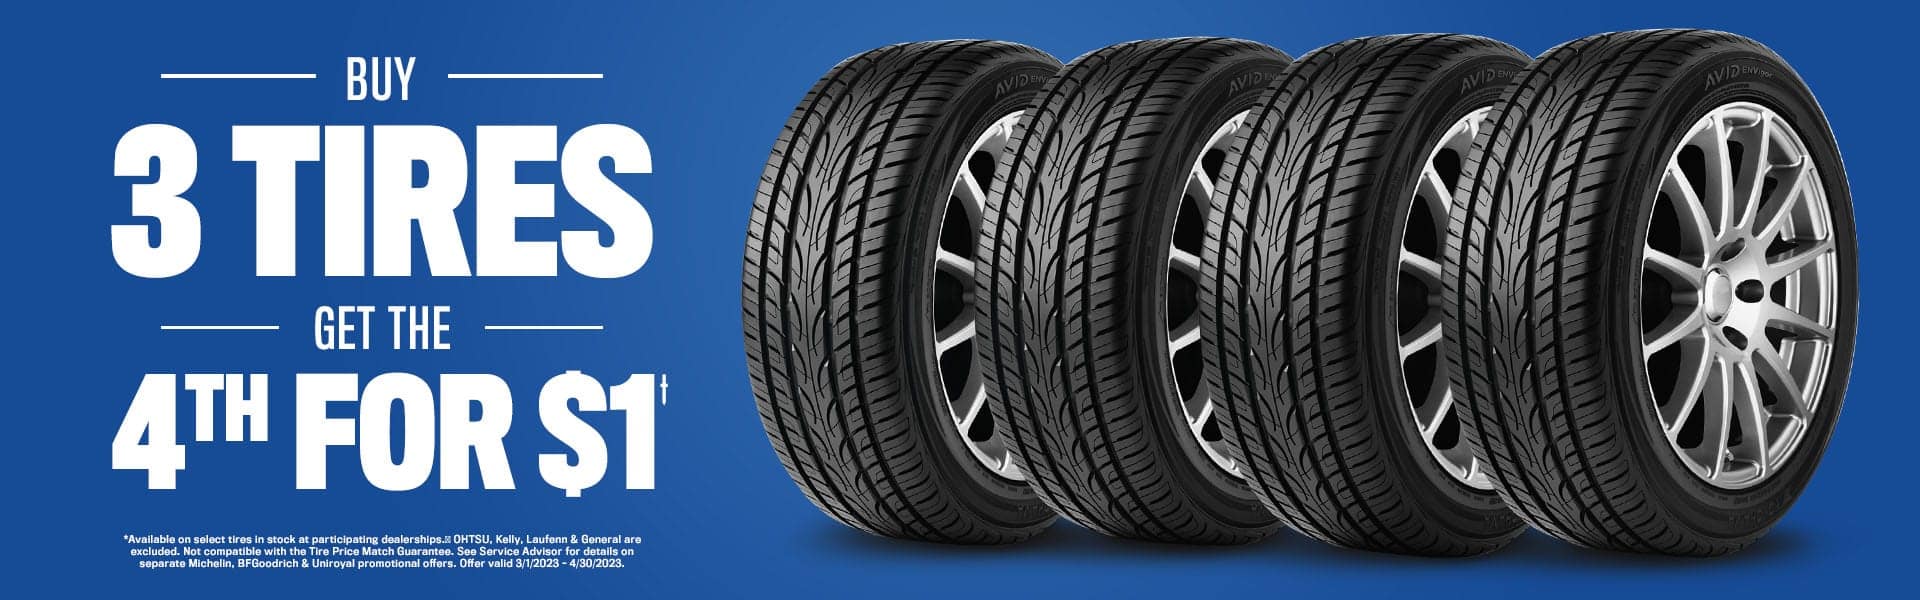 Buy 3 Tires get the 4th for 1$